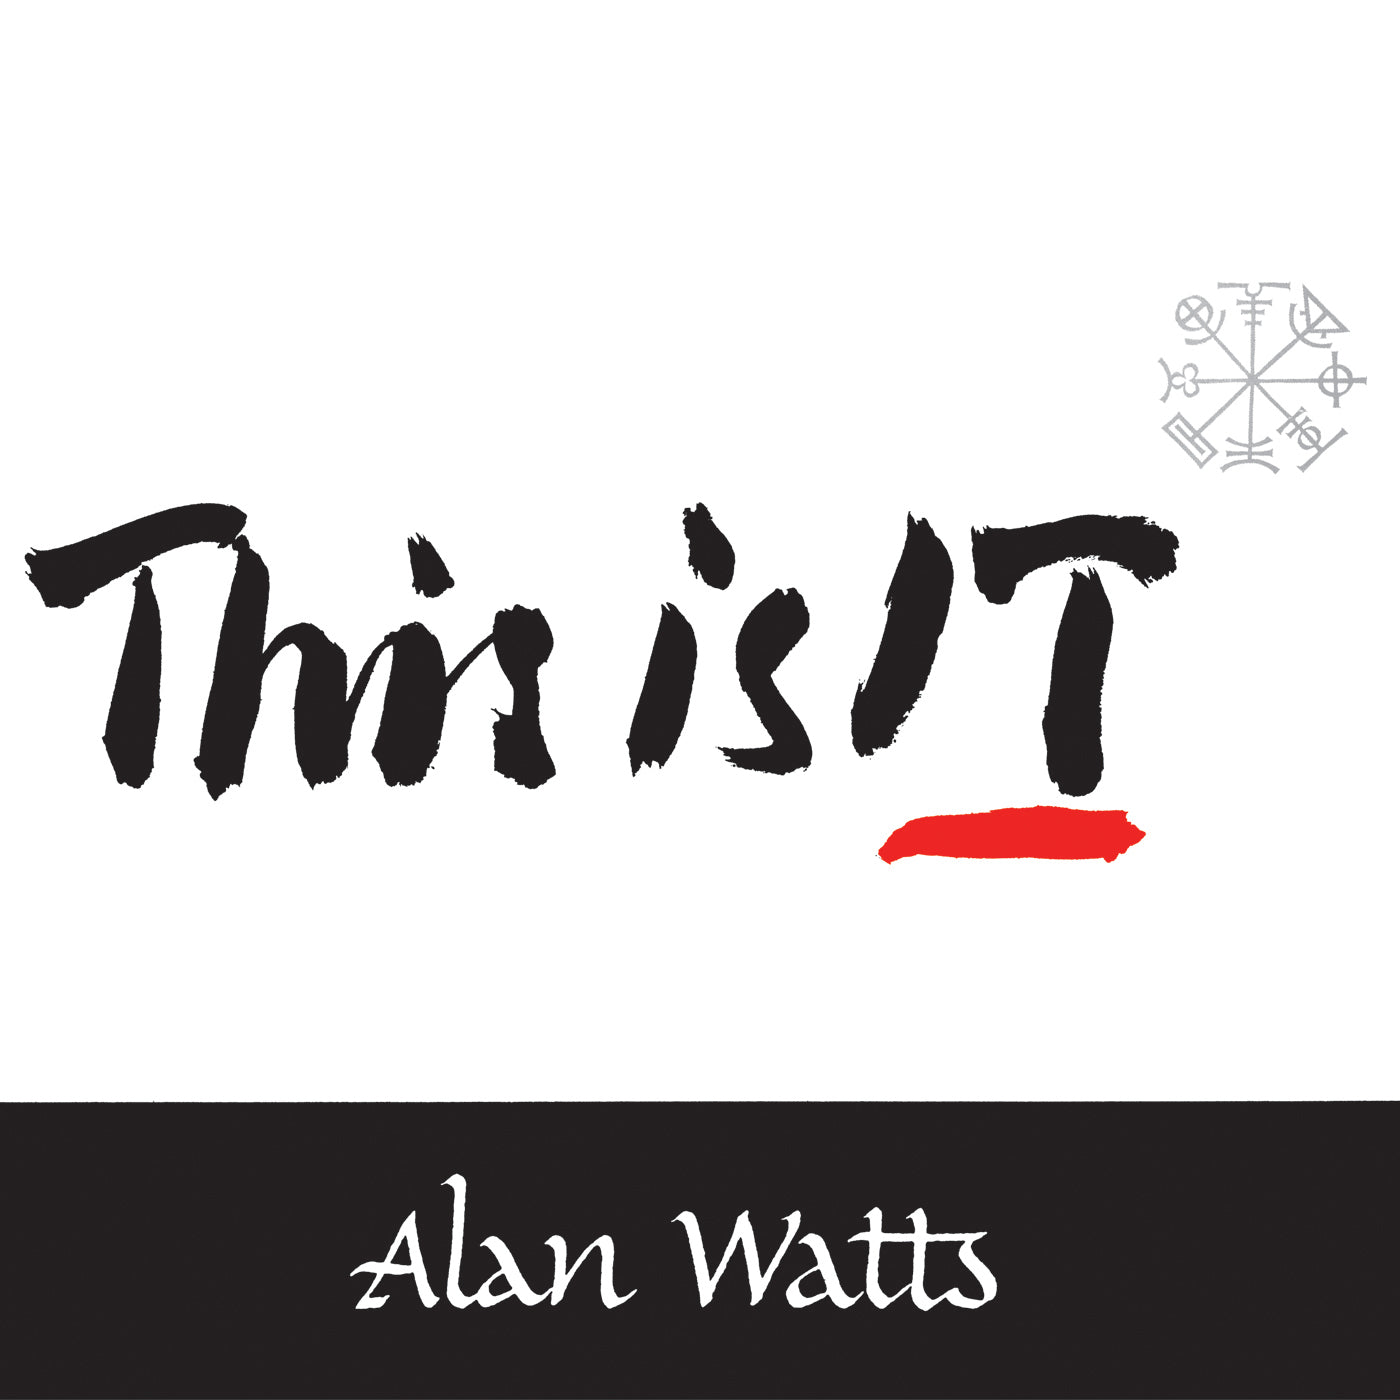 Alan Watts - This Is IT